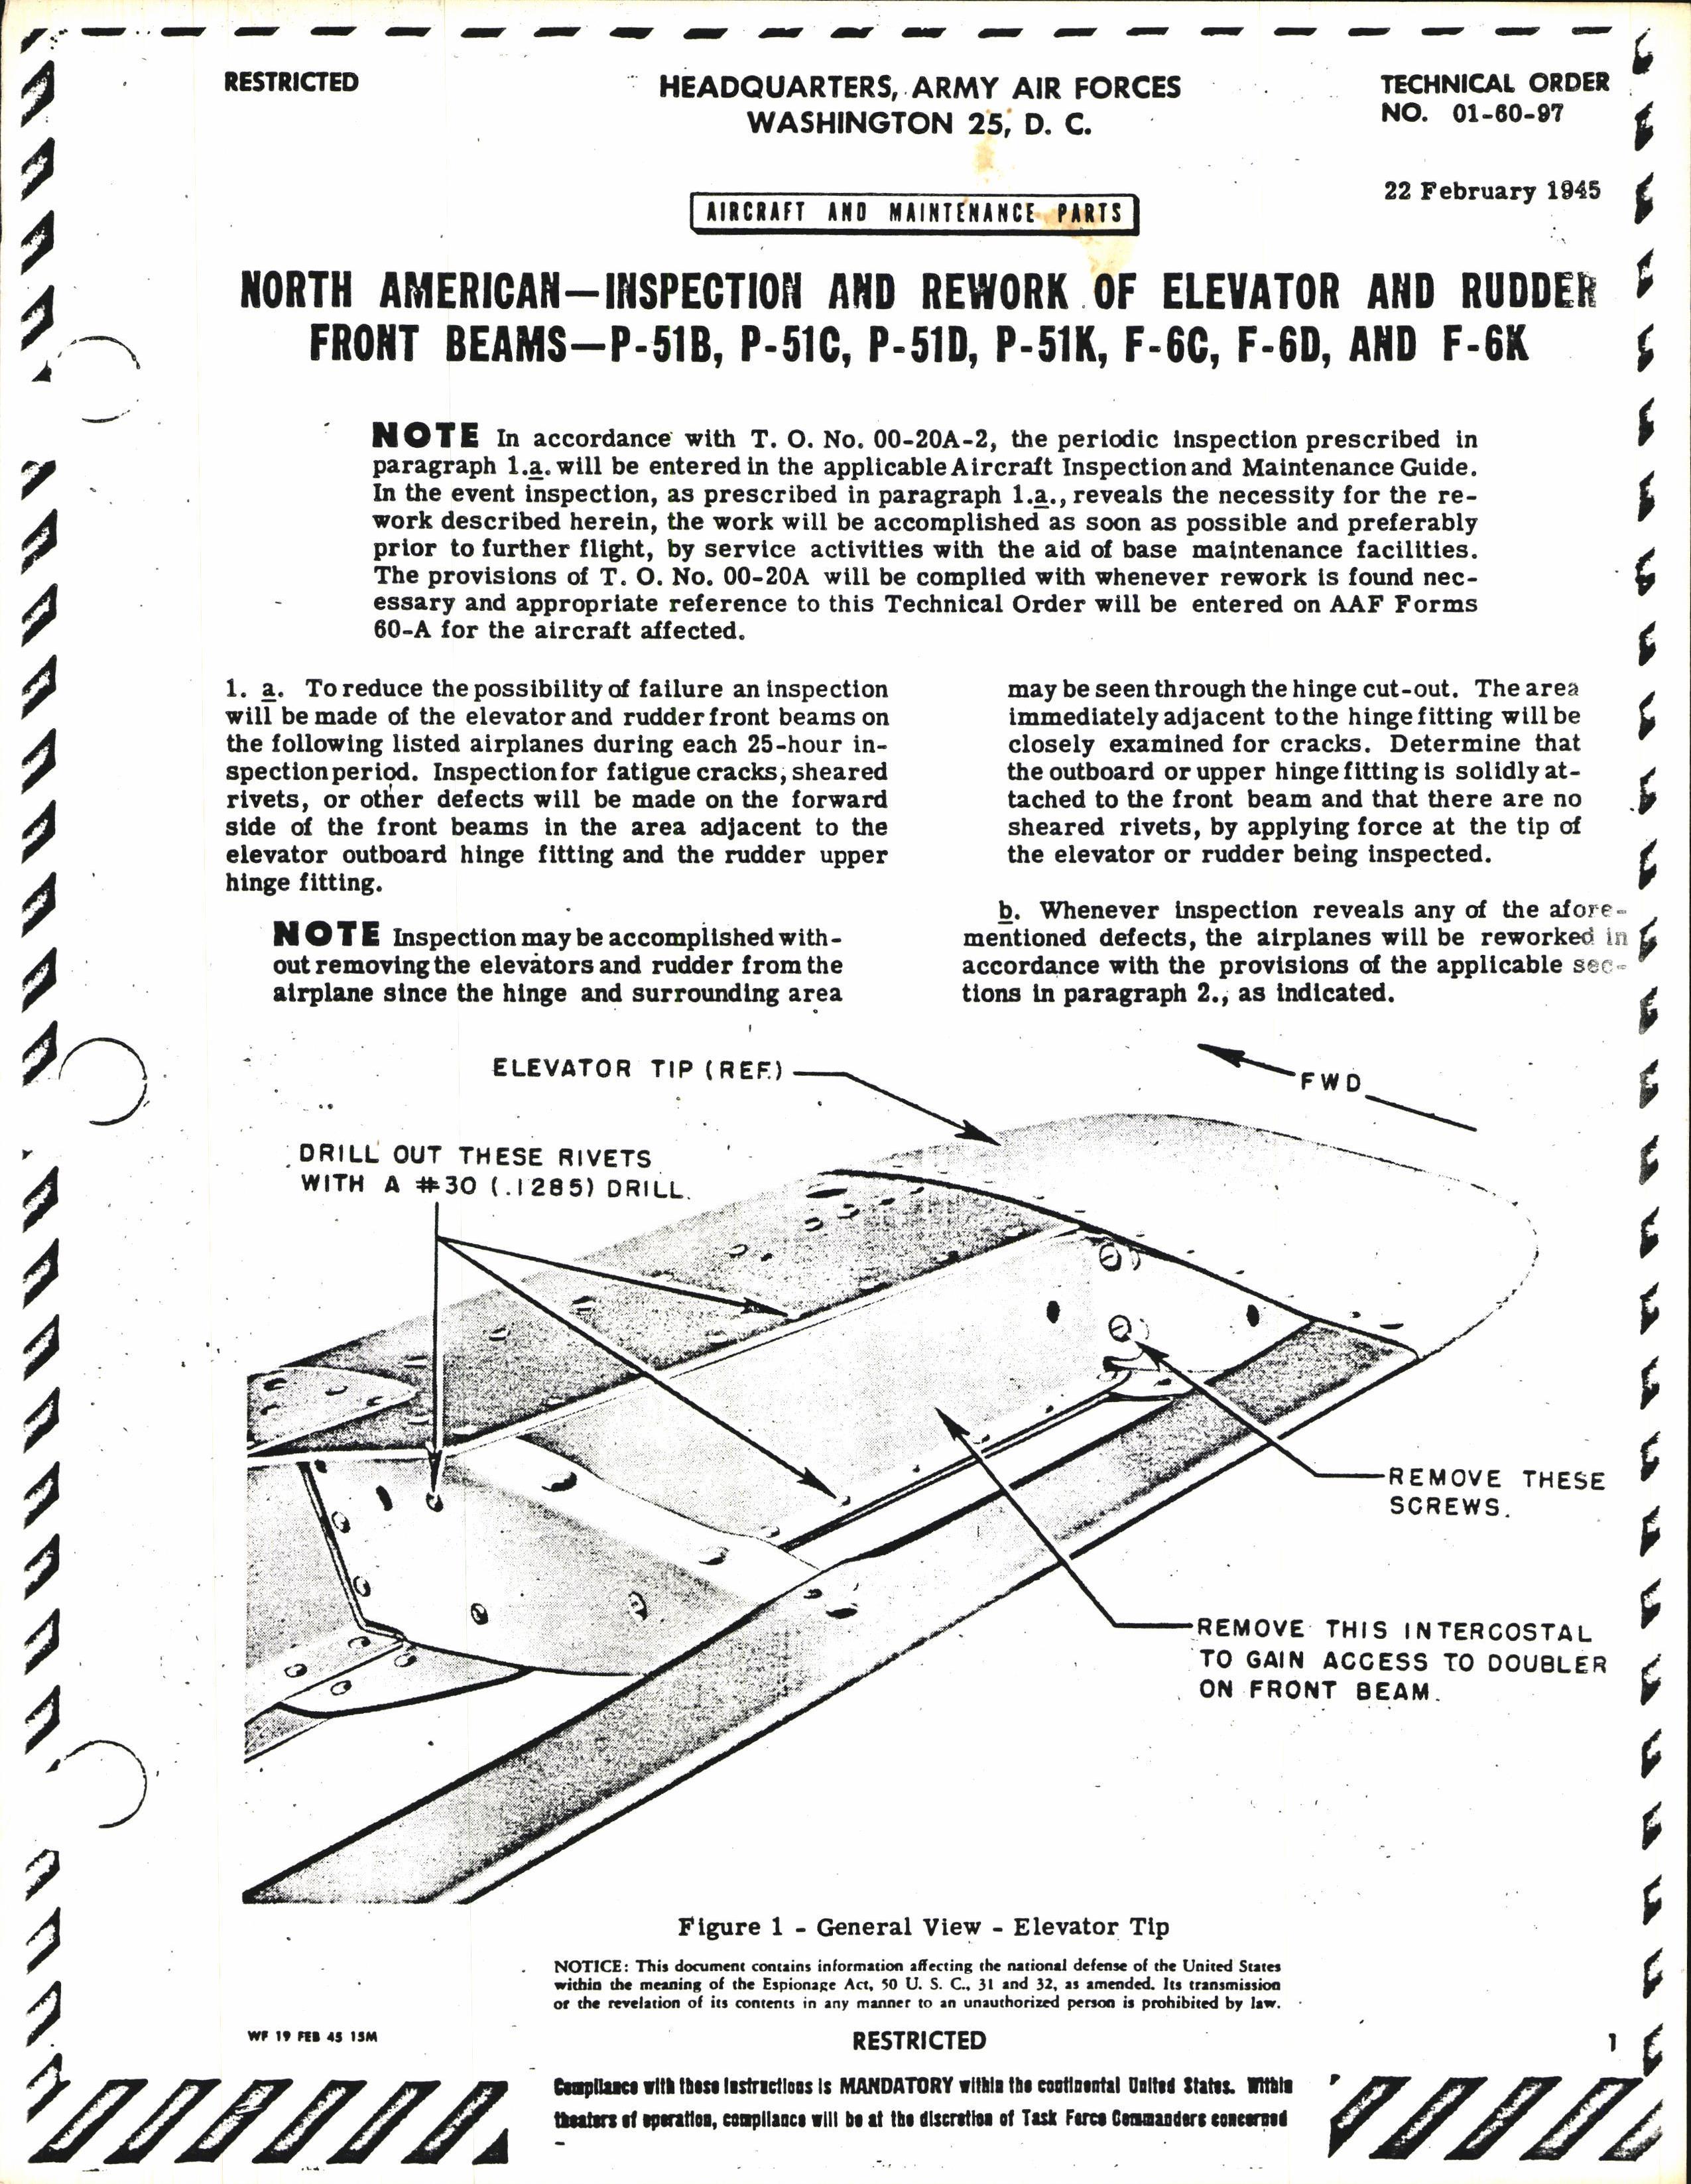 Sample page 1 from AirCorps Library document: Inspection and Rework of Elevator and Rudder Front Beams